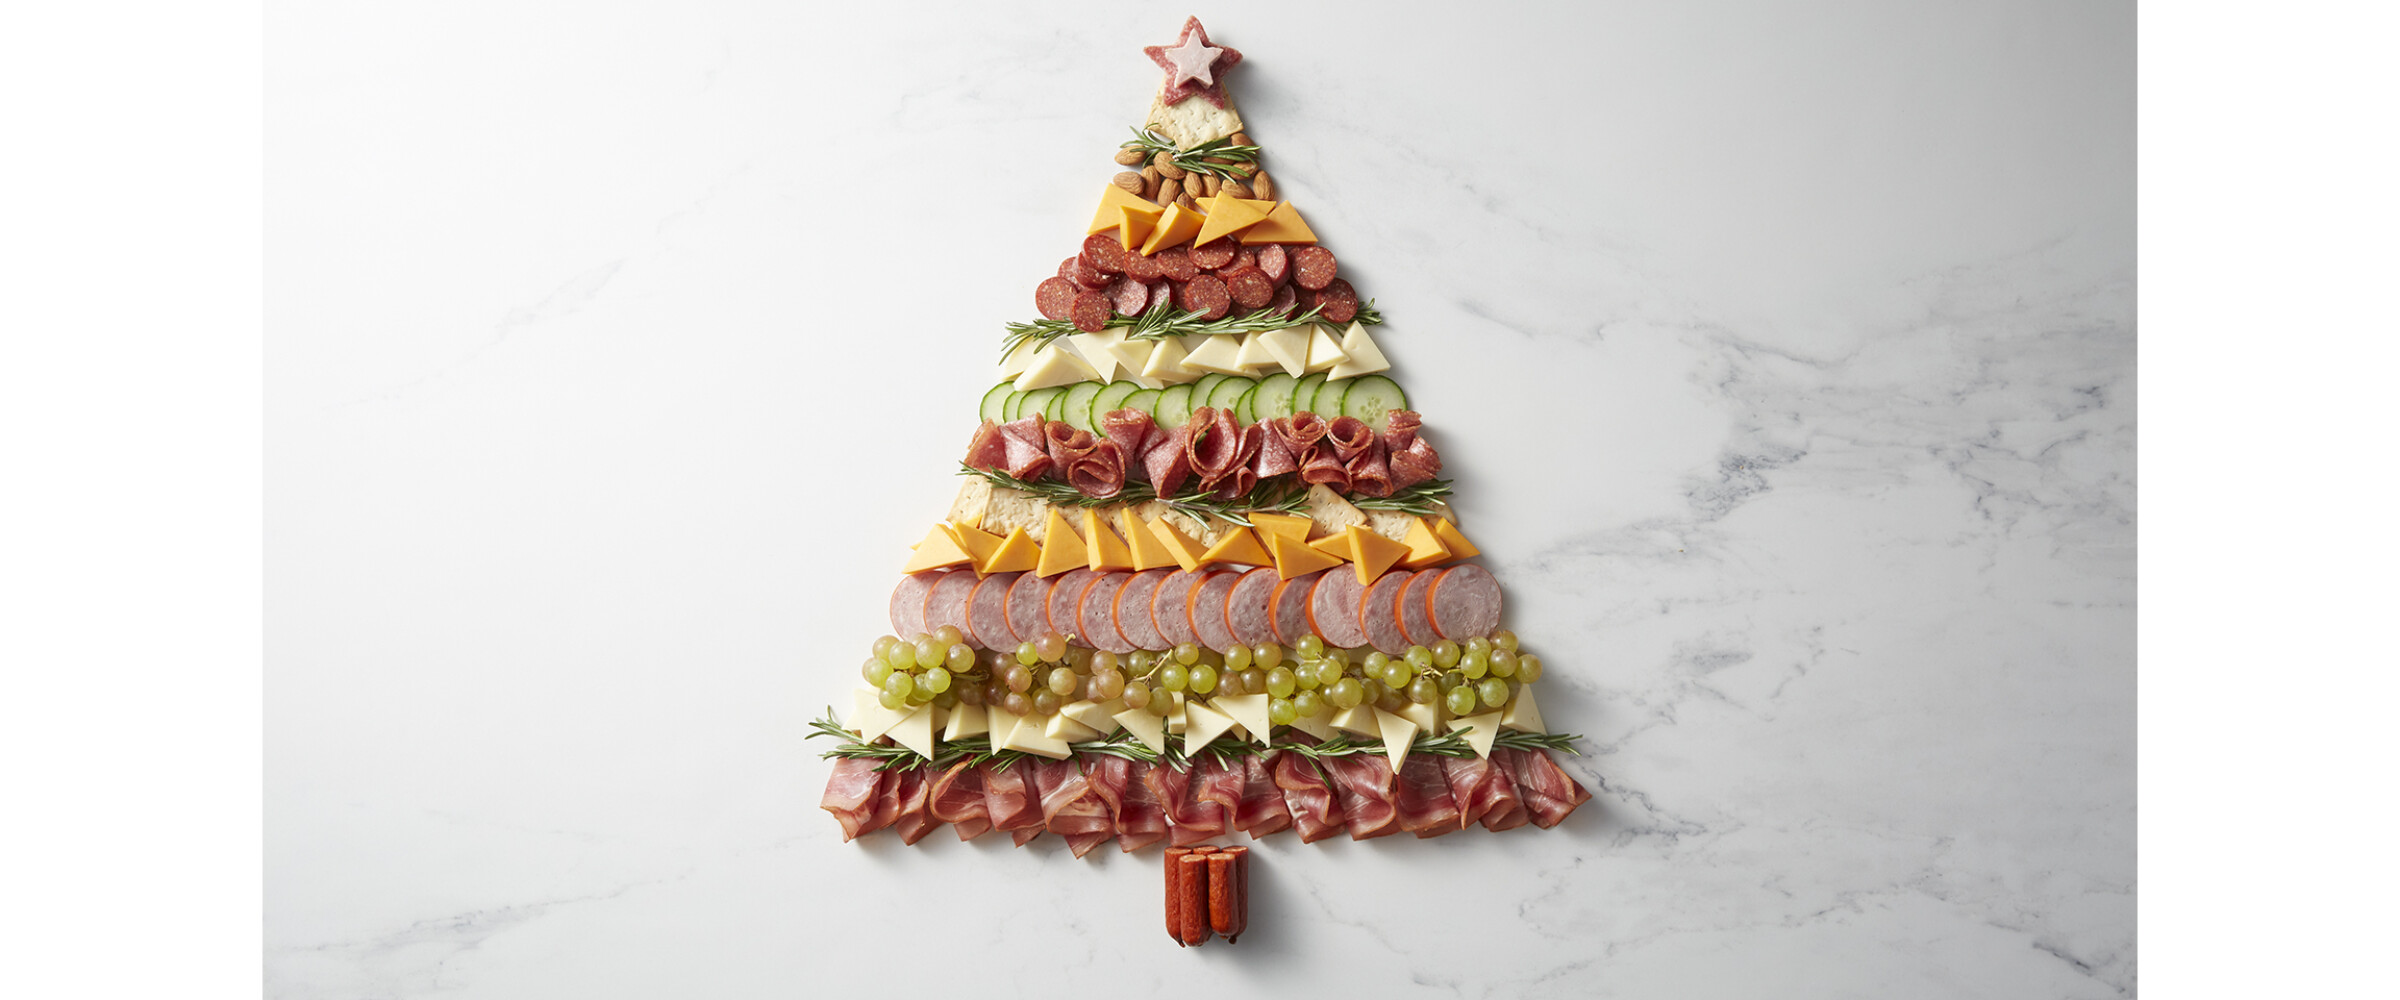 Charcuterie meats, cheeses, and fruits in the shape of a christmas tree